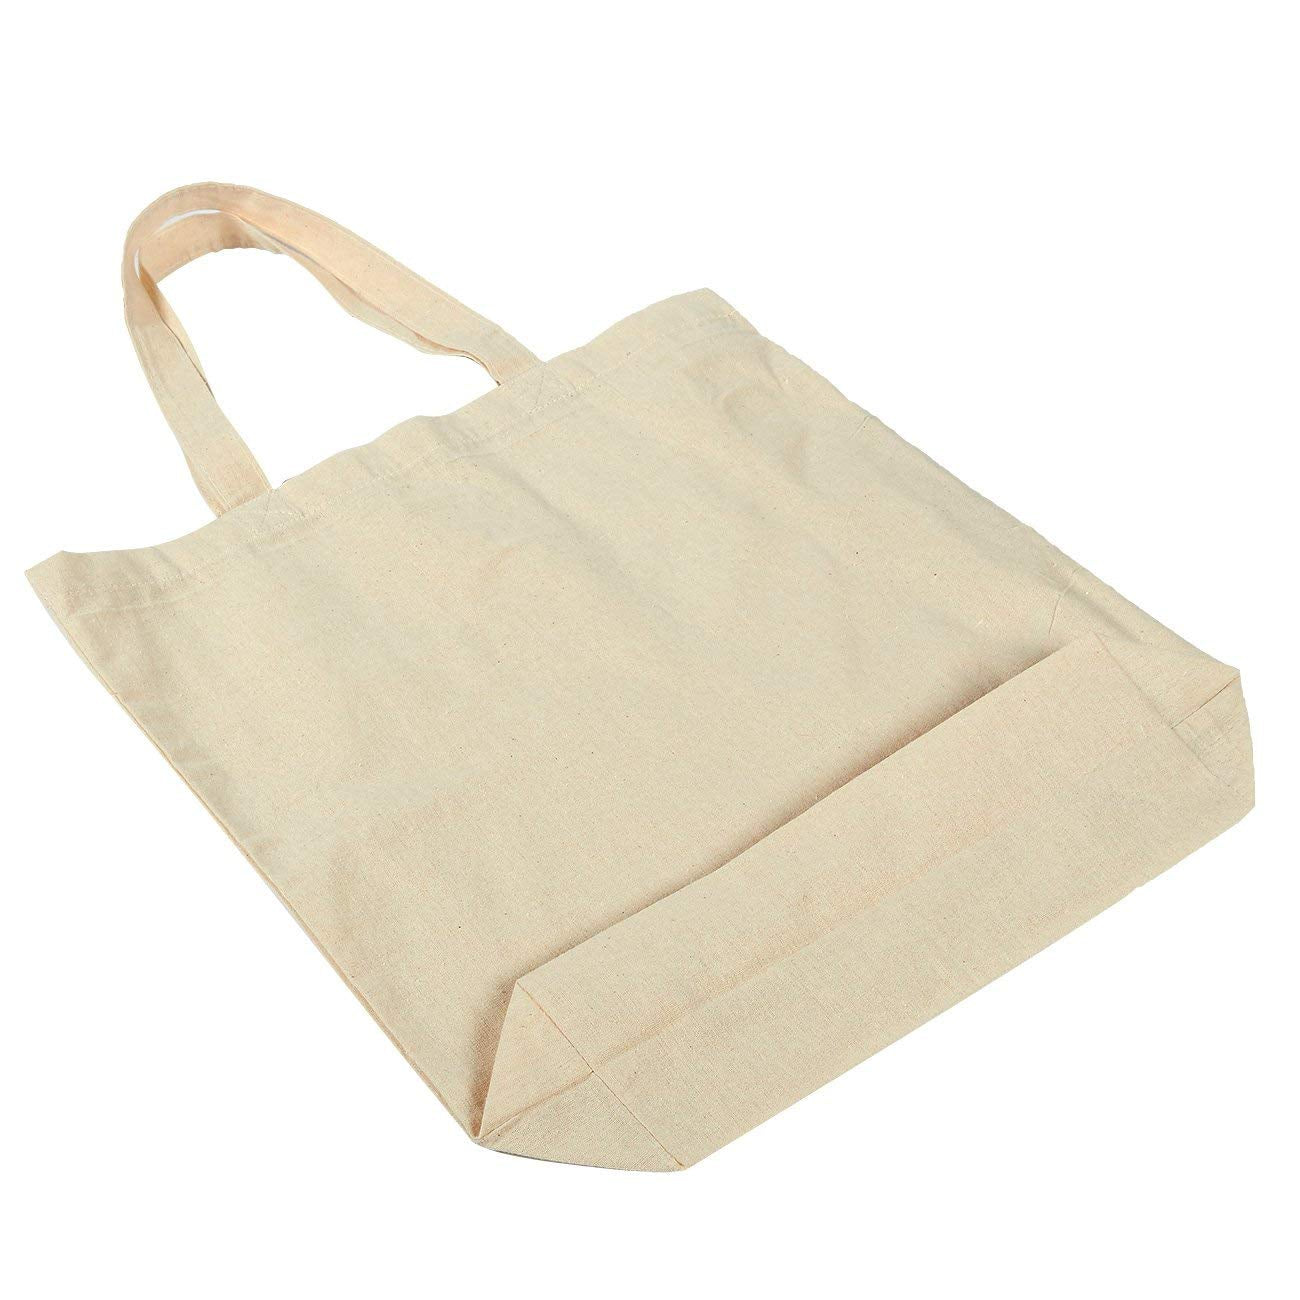 Economical Red Cotton Tote Bag.